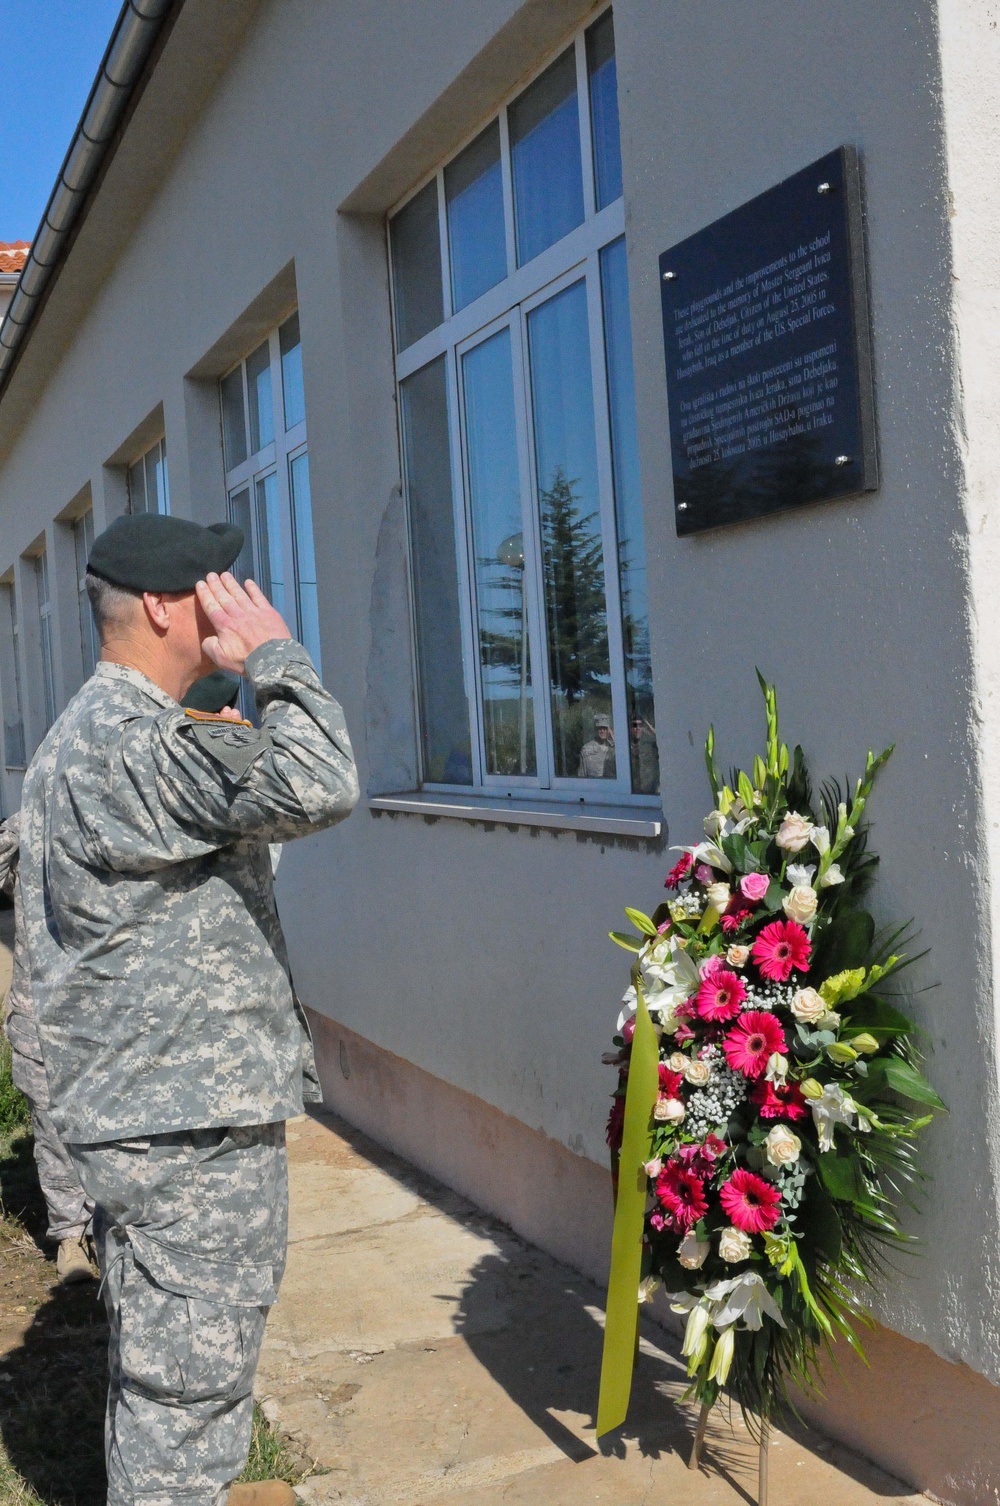 Exercise Jackal Stone leadership remembers fallen Special Forces soldier in Croatia